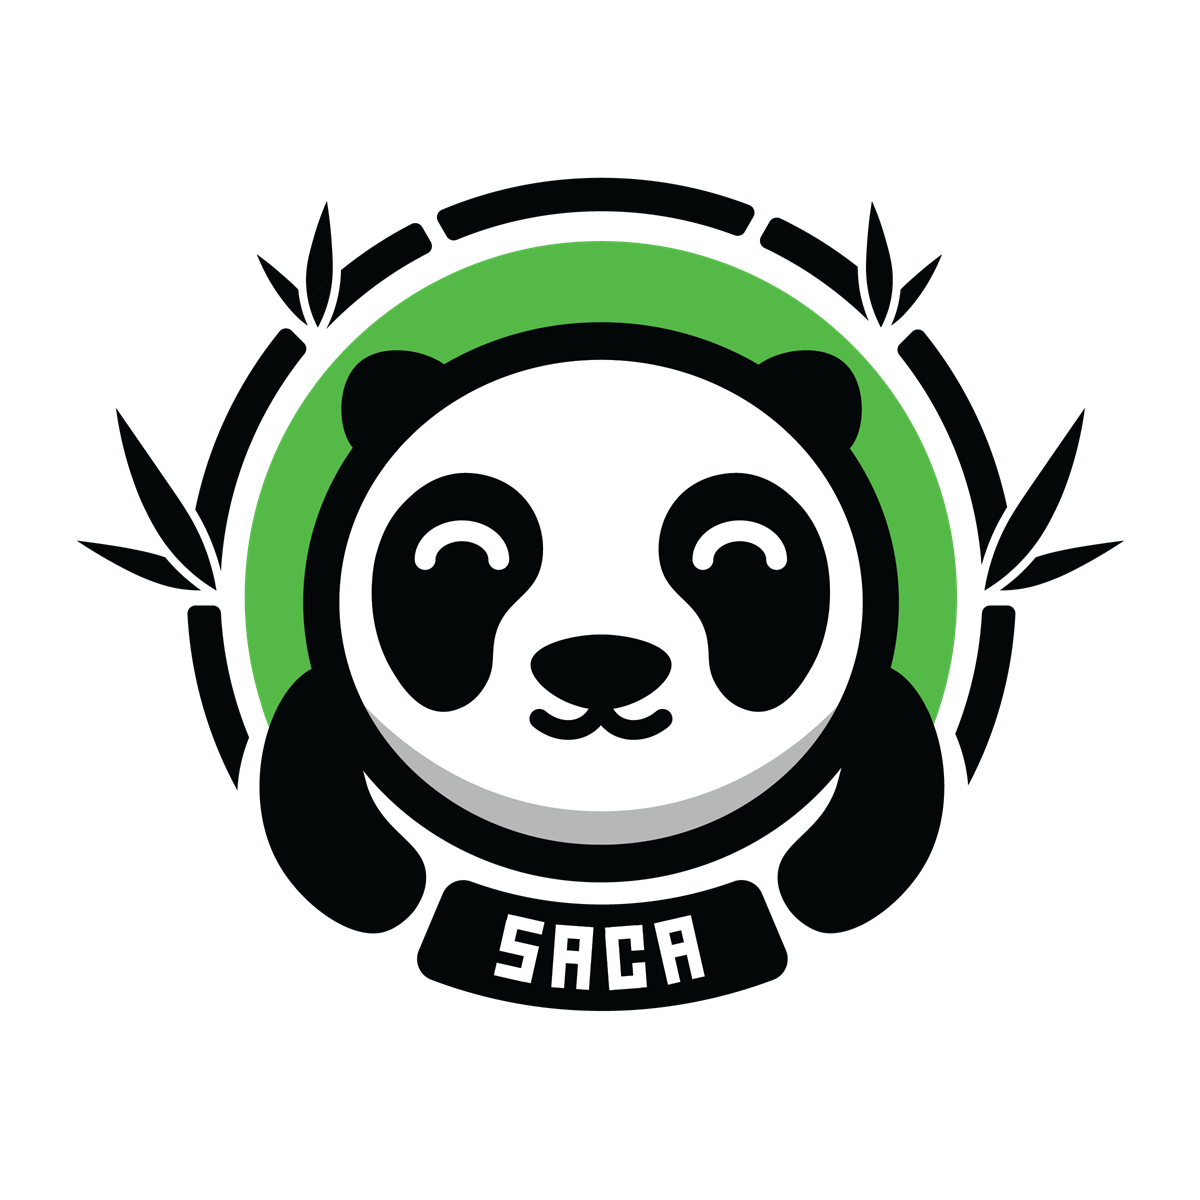 SACA (Student Association of Chinese Americans) in white Letters, Background: Black Bamboo Circle Around a Panda with a Green Glow 